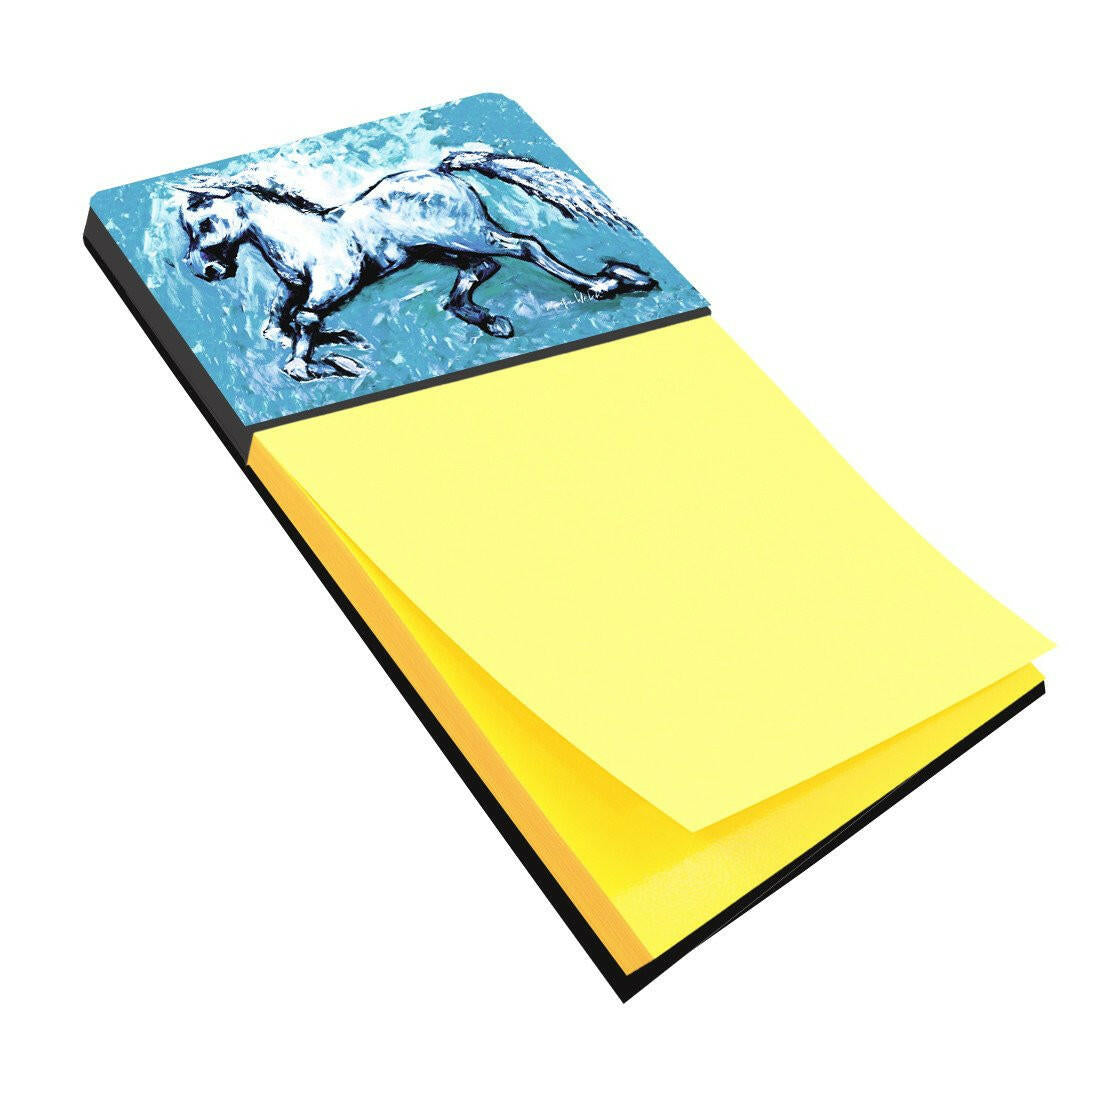 Shadow the Horse in blue Refiillable Sticky Note Holder or Postit Note Dispenser MW1171SN by Caroline's Treasures